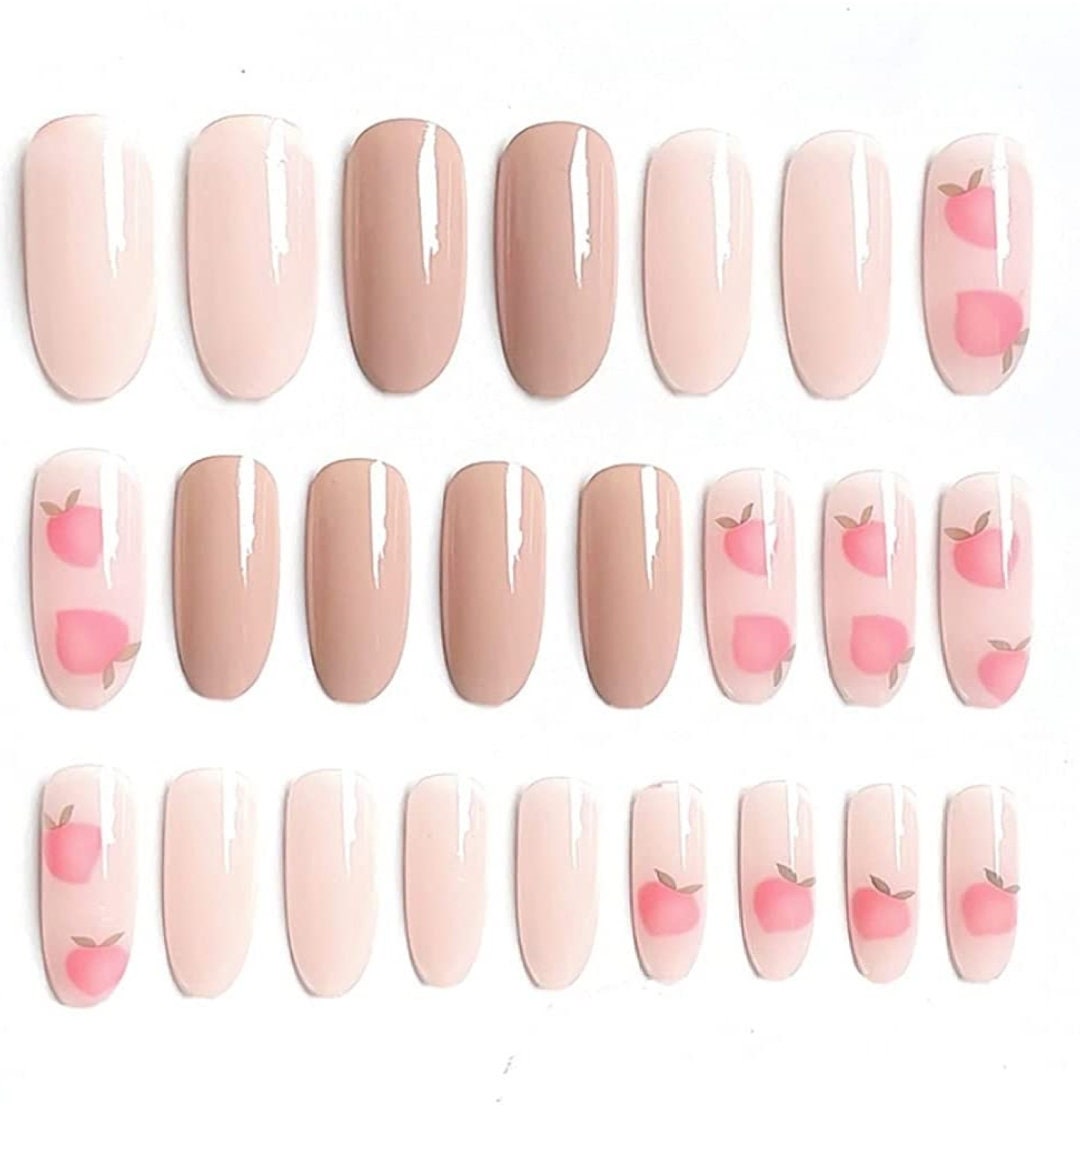 24 Peachy Long Press on nails glue on nude pink summer pretty long oval almond design